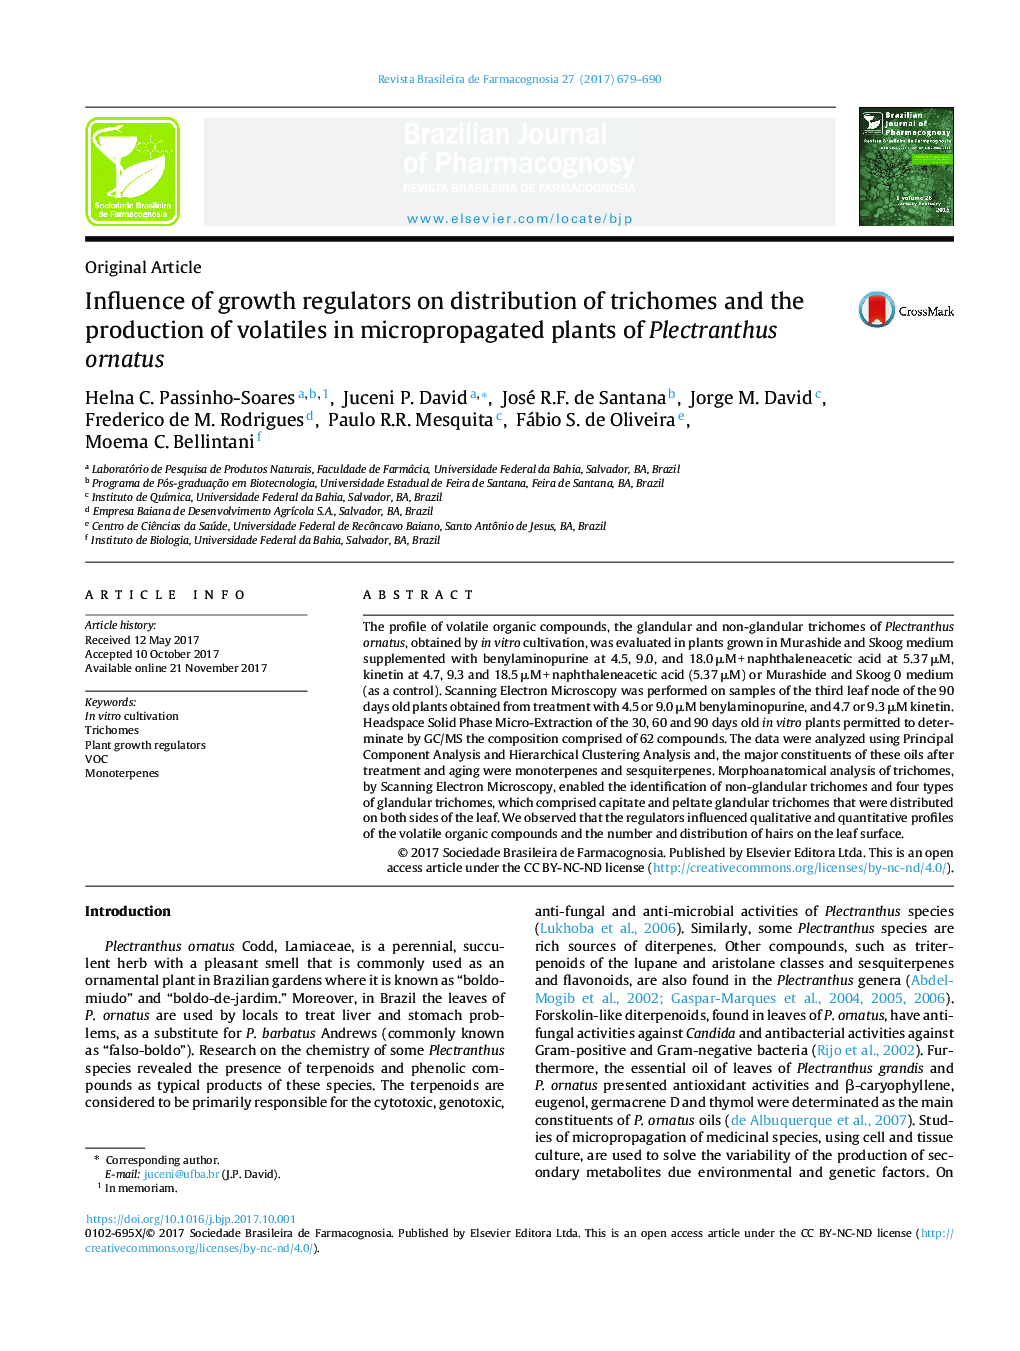 Influence of growth regulators on distribution of trichomes and the production of volatiles in micropropagated plants of Plectranthus ornatus